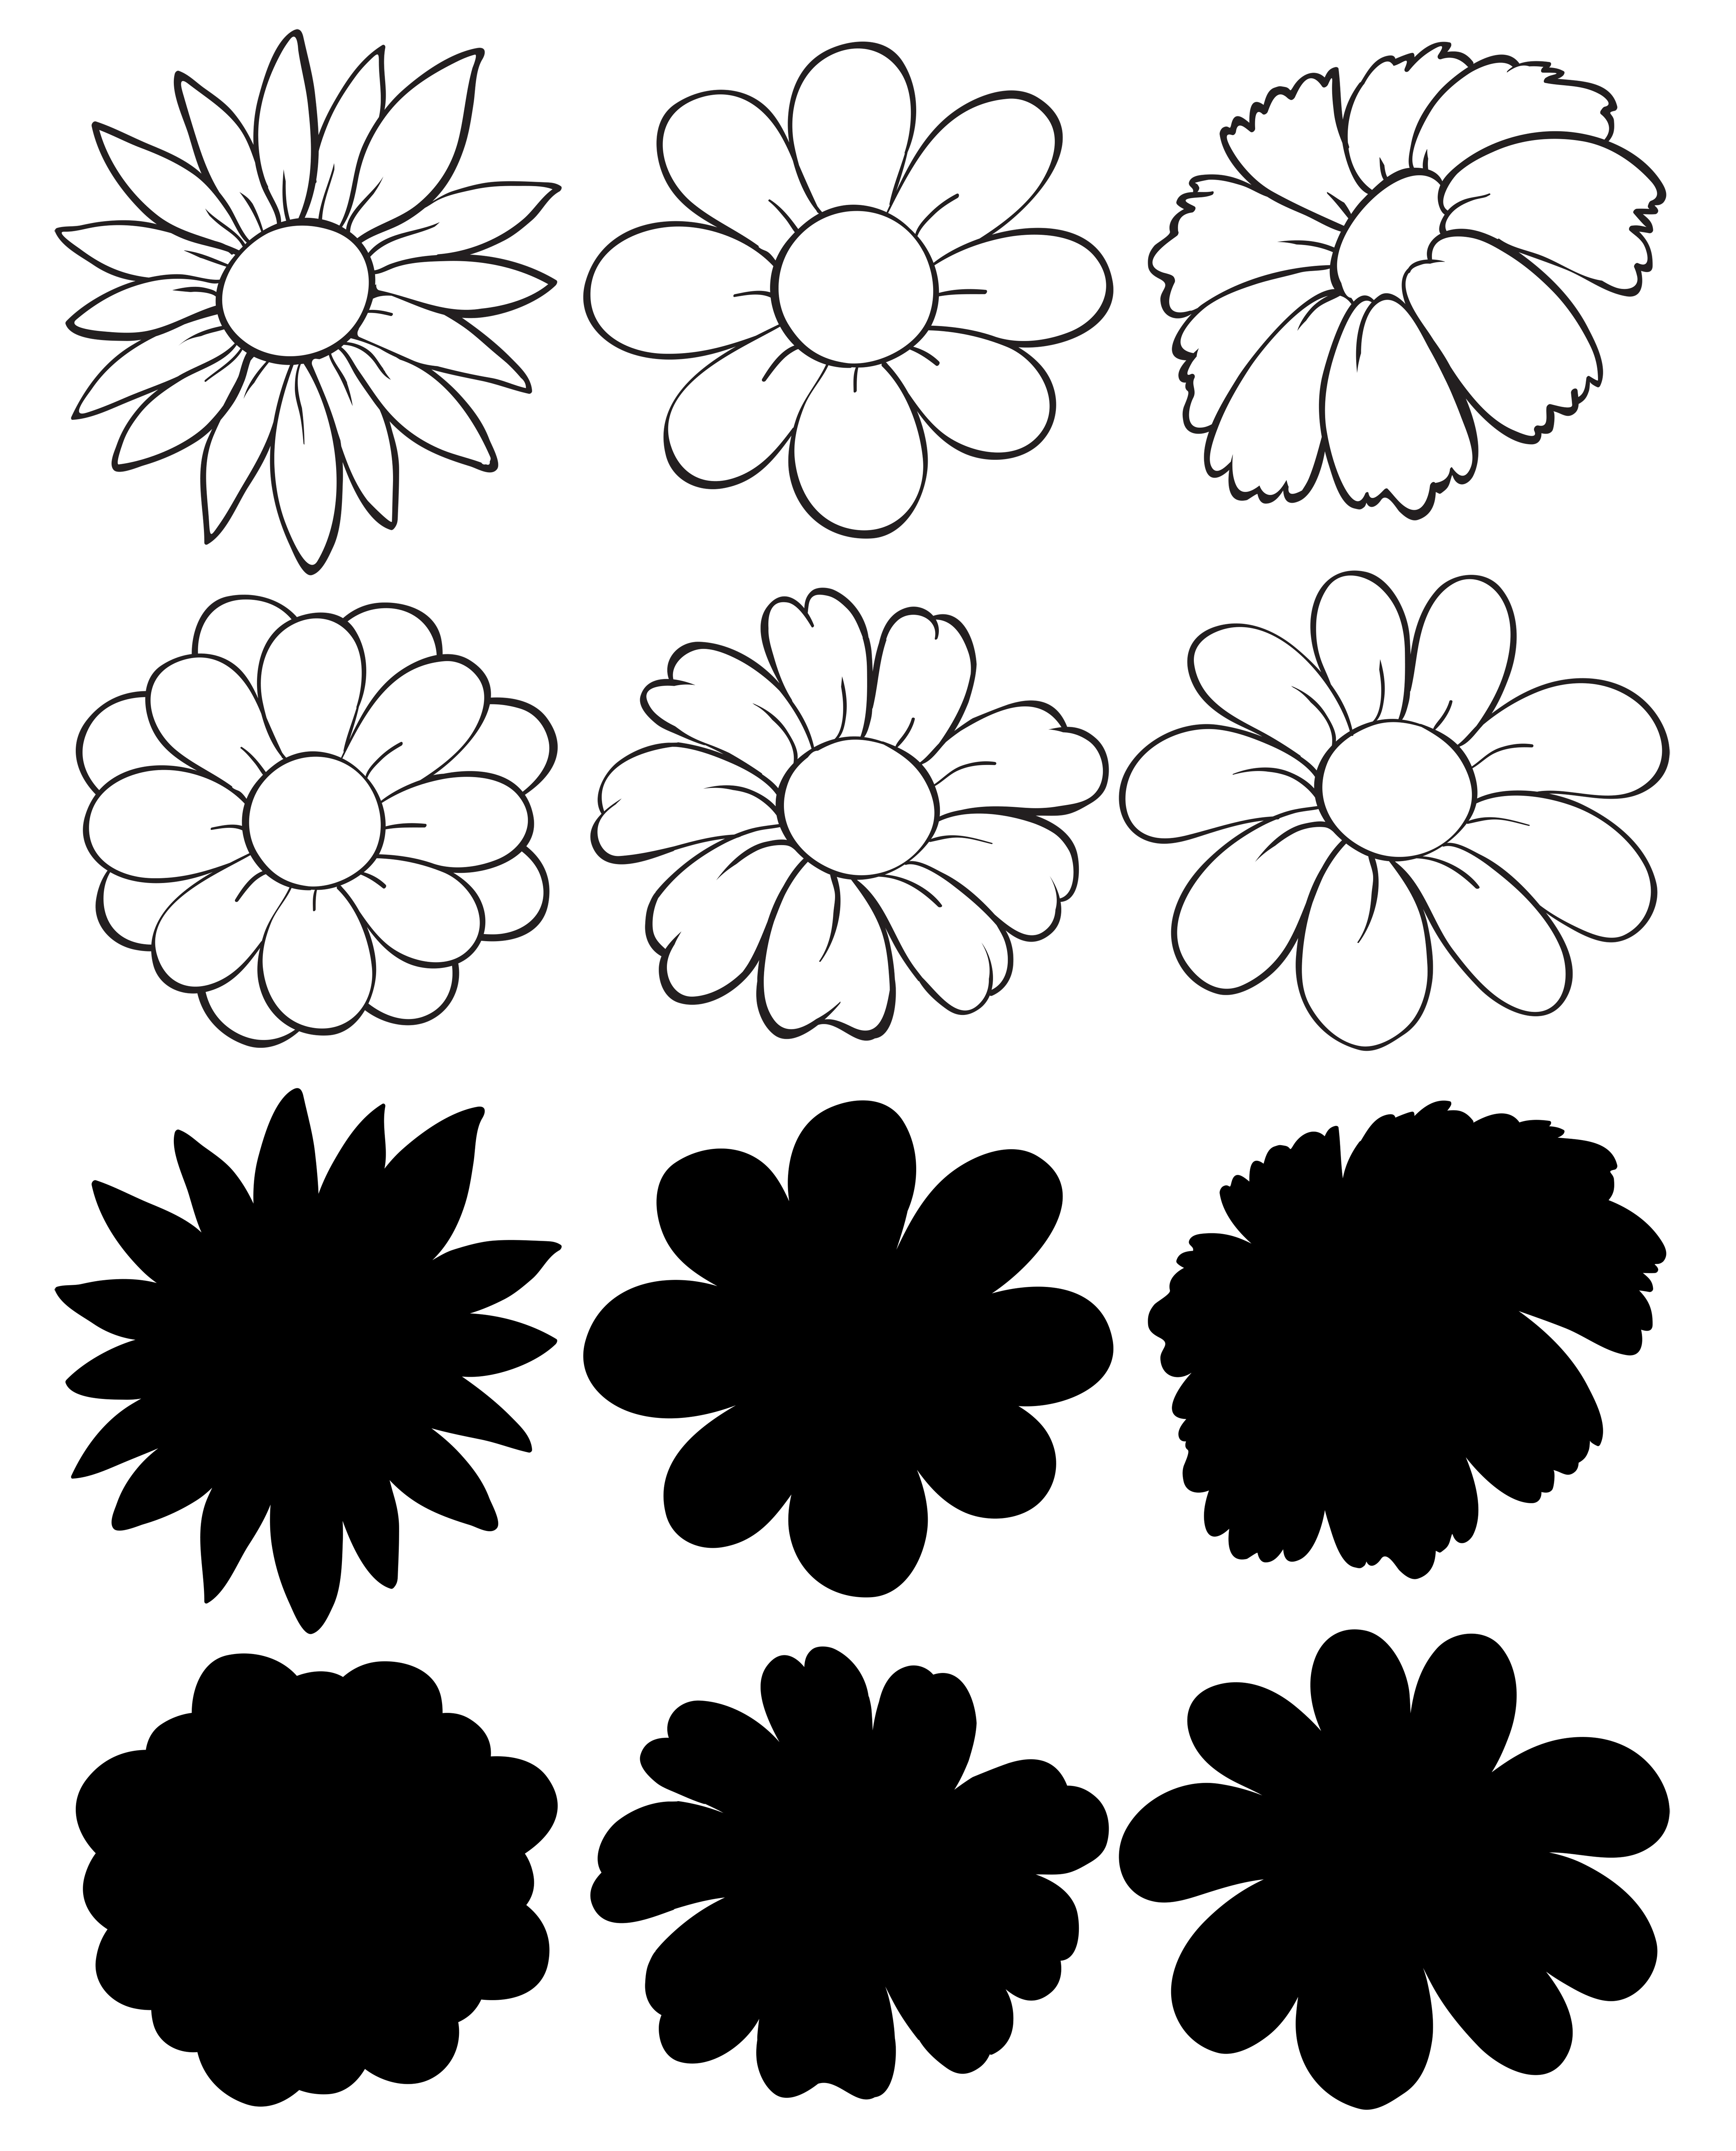 Download A set of doodle and silhouette flowers - Download Free ...